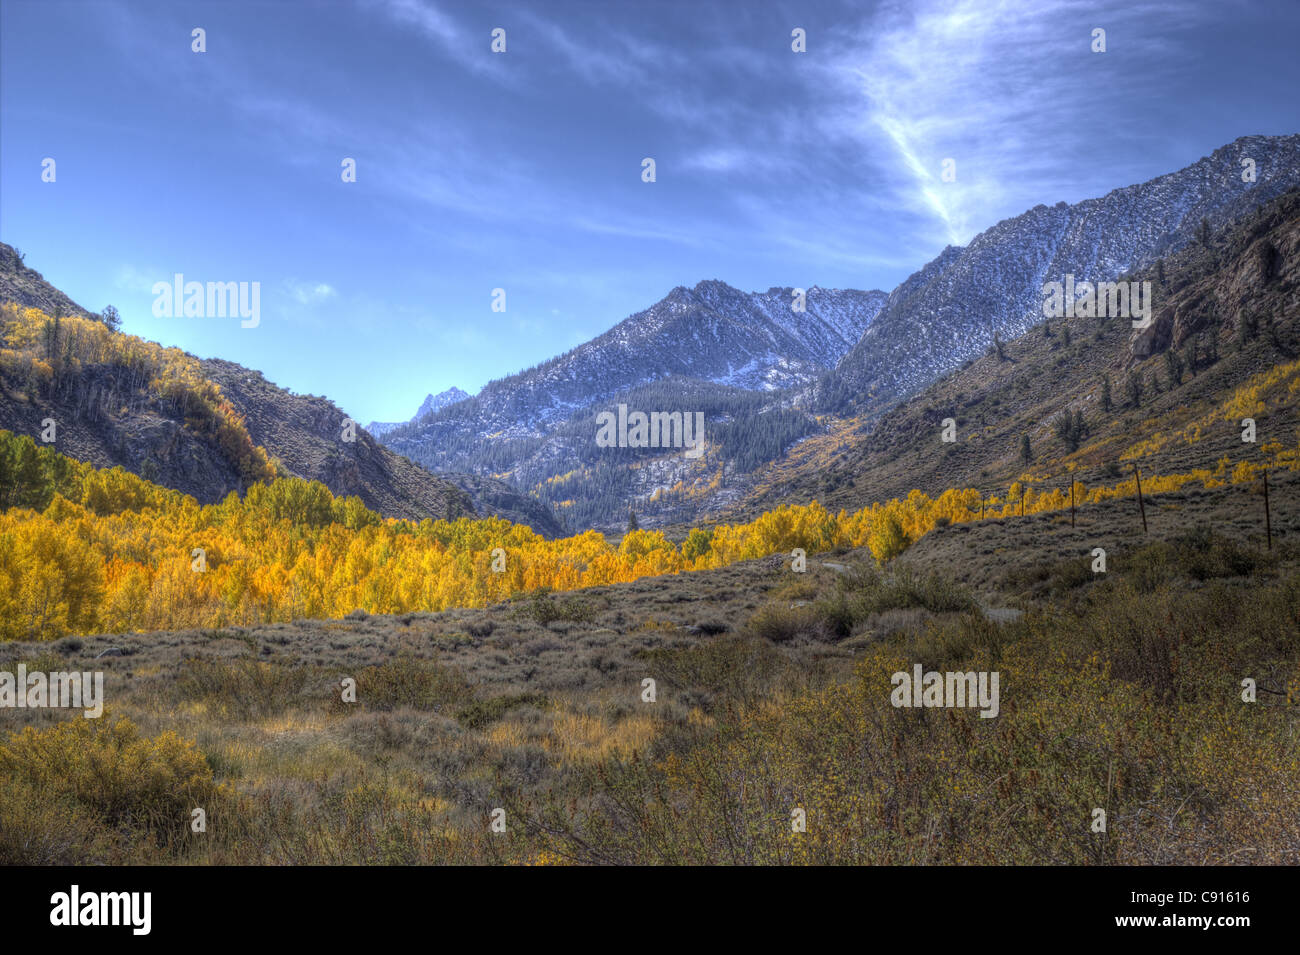 Golden aspen in a canyon in the Eastern Sierras with scenic mountains and interesting clouds. Stock Photo